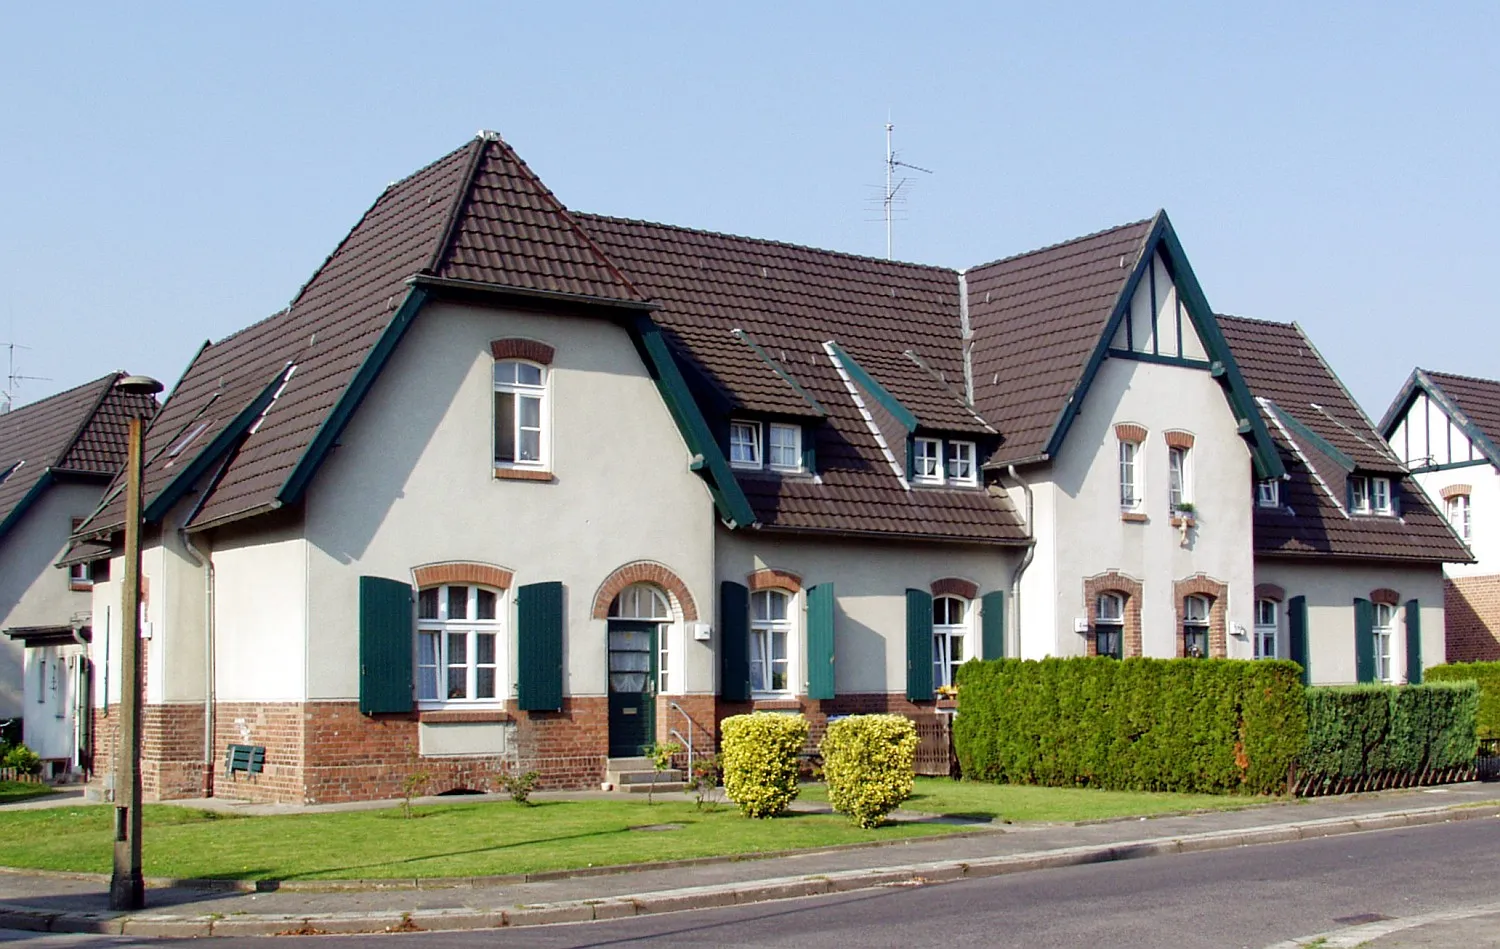 Photo showing: House of the miner colony "Meerbeck" in Moers, Germany